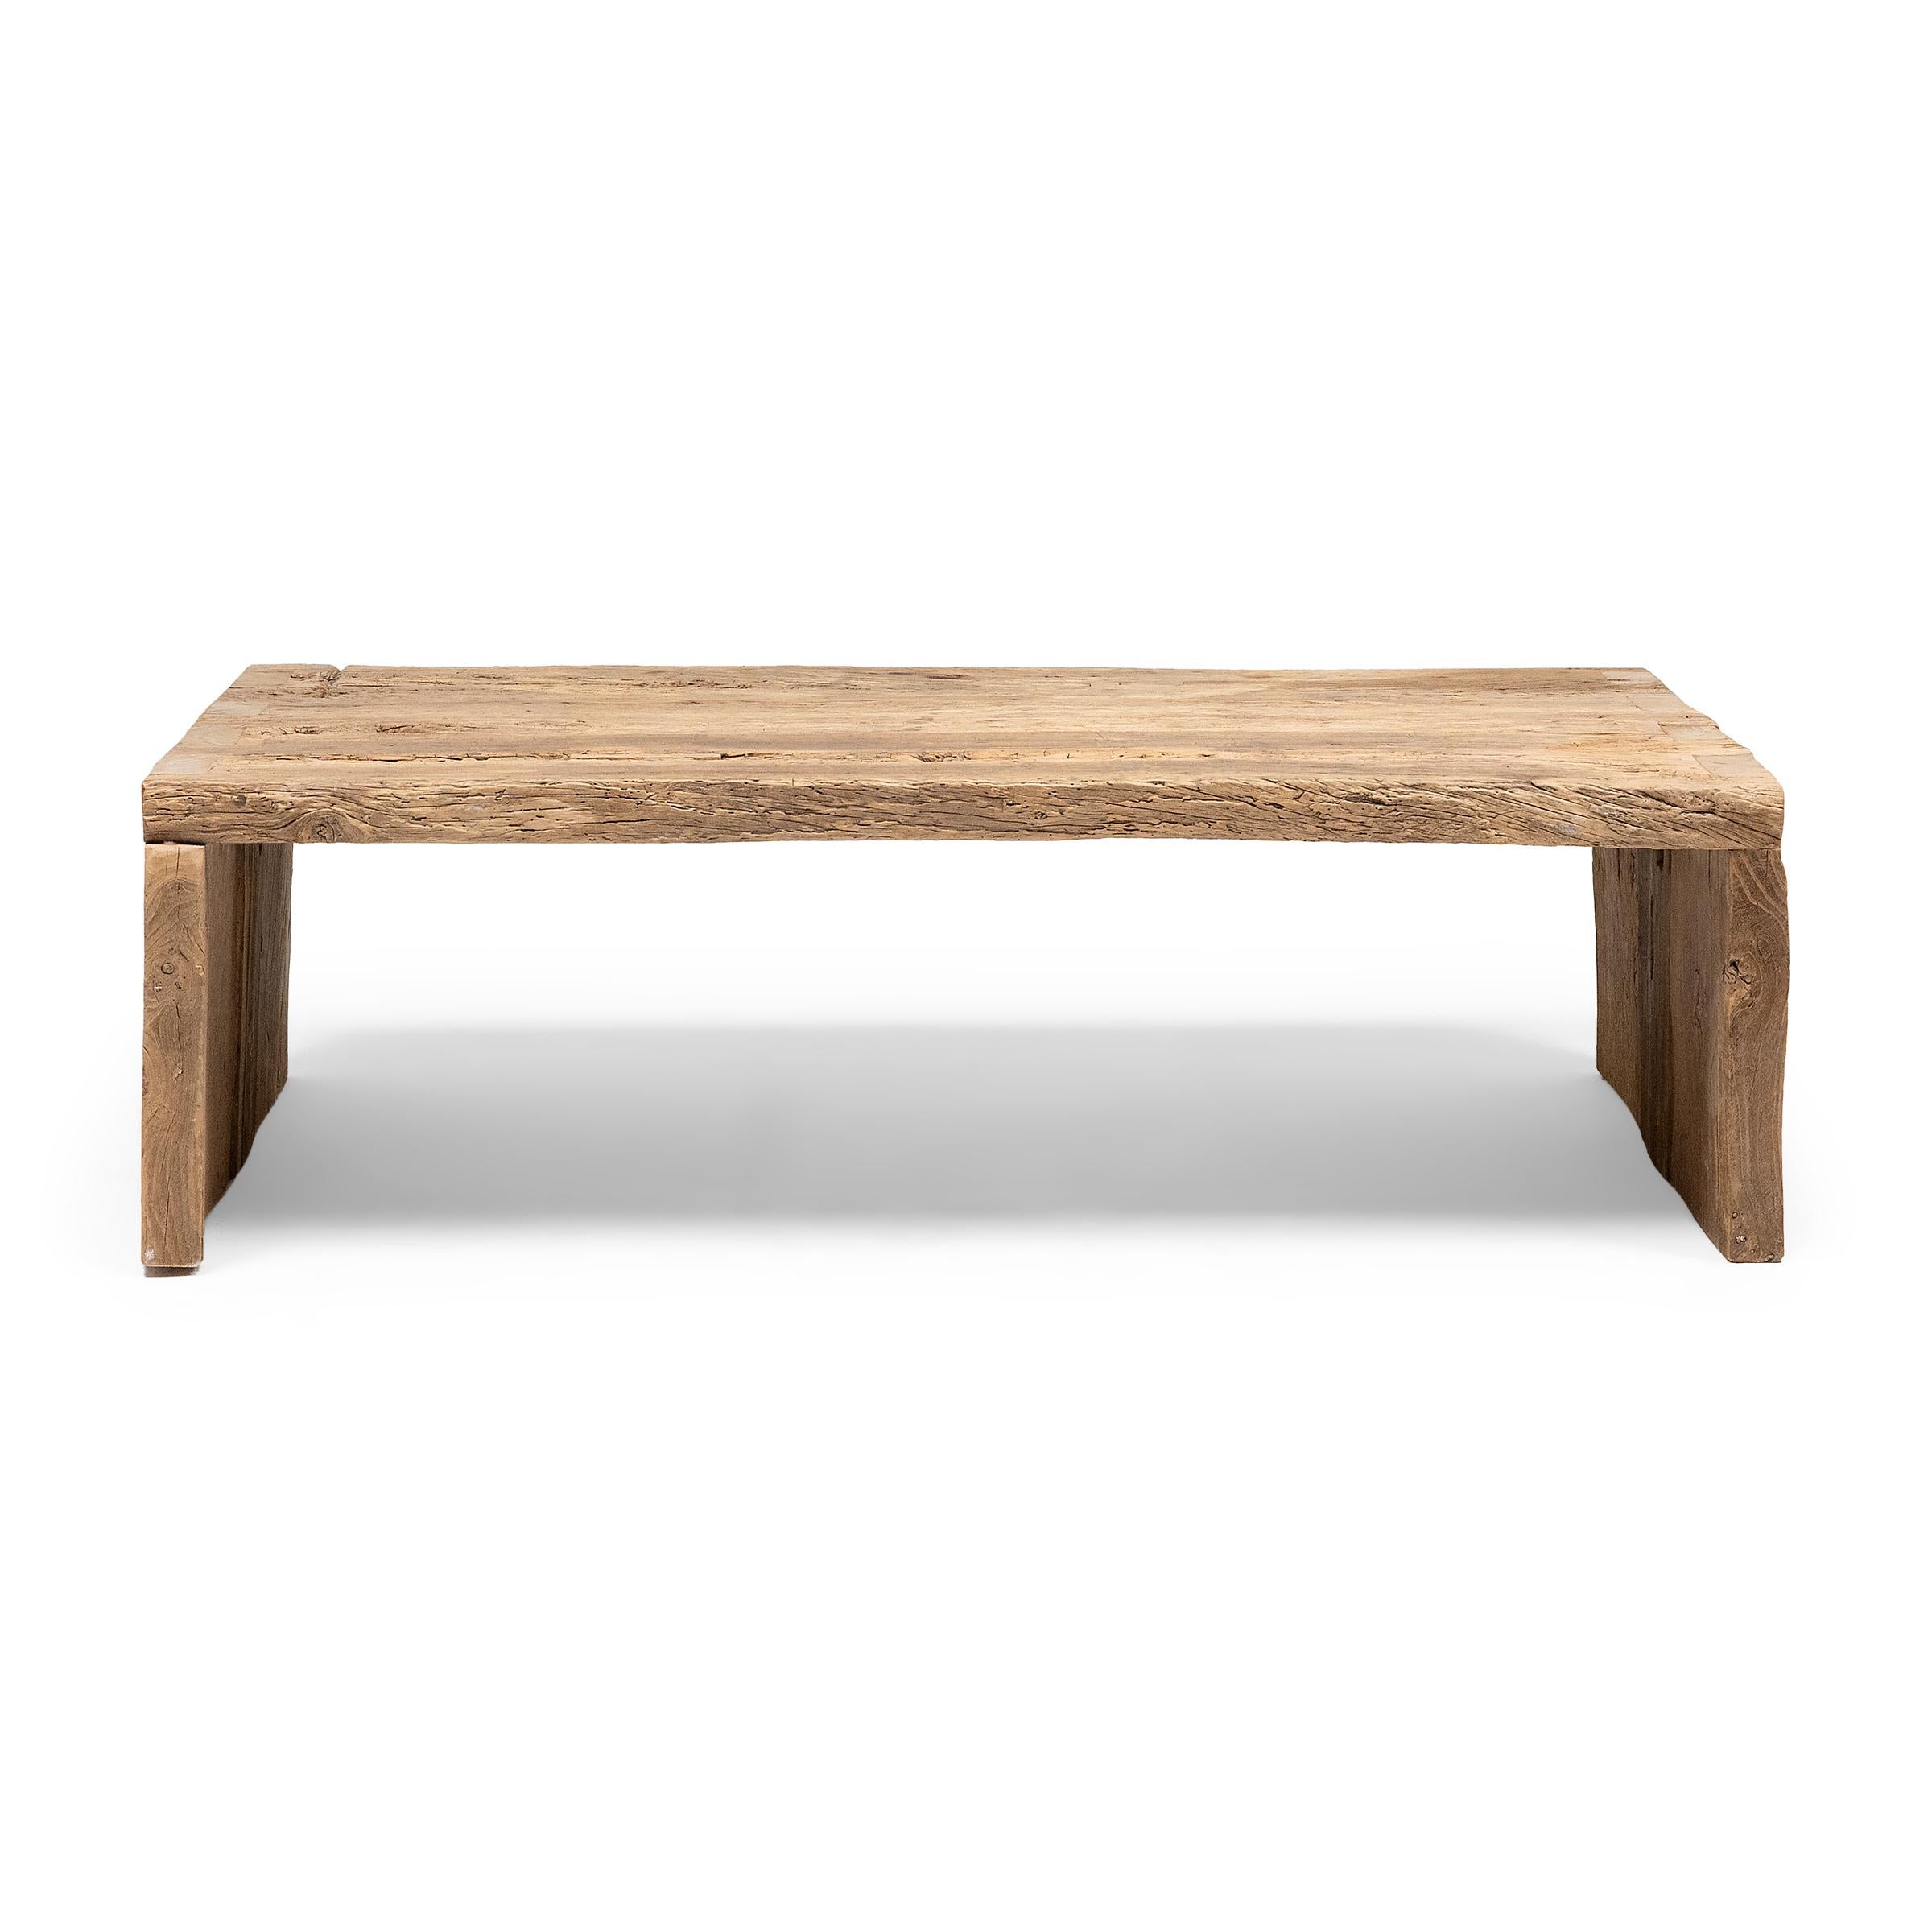 This artisan-crafted low table is a celebration of wabi-sabi style. Crafted of thick elmwood timbers reclaimed from Qing-dynasty architecture, the table has a minimalist waterfall design and is left unfinished to preserve the natural beauty of its